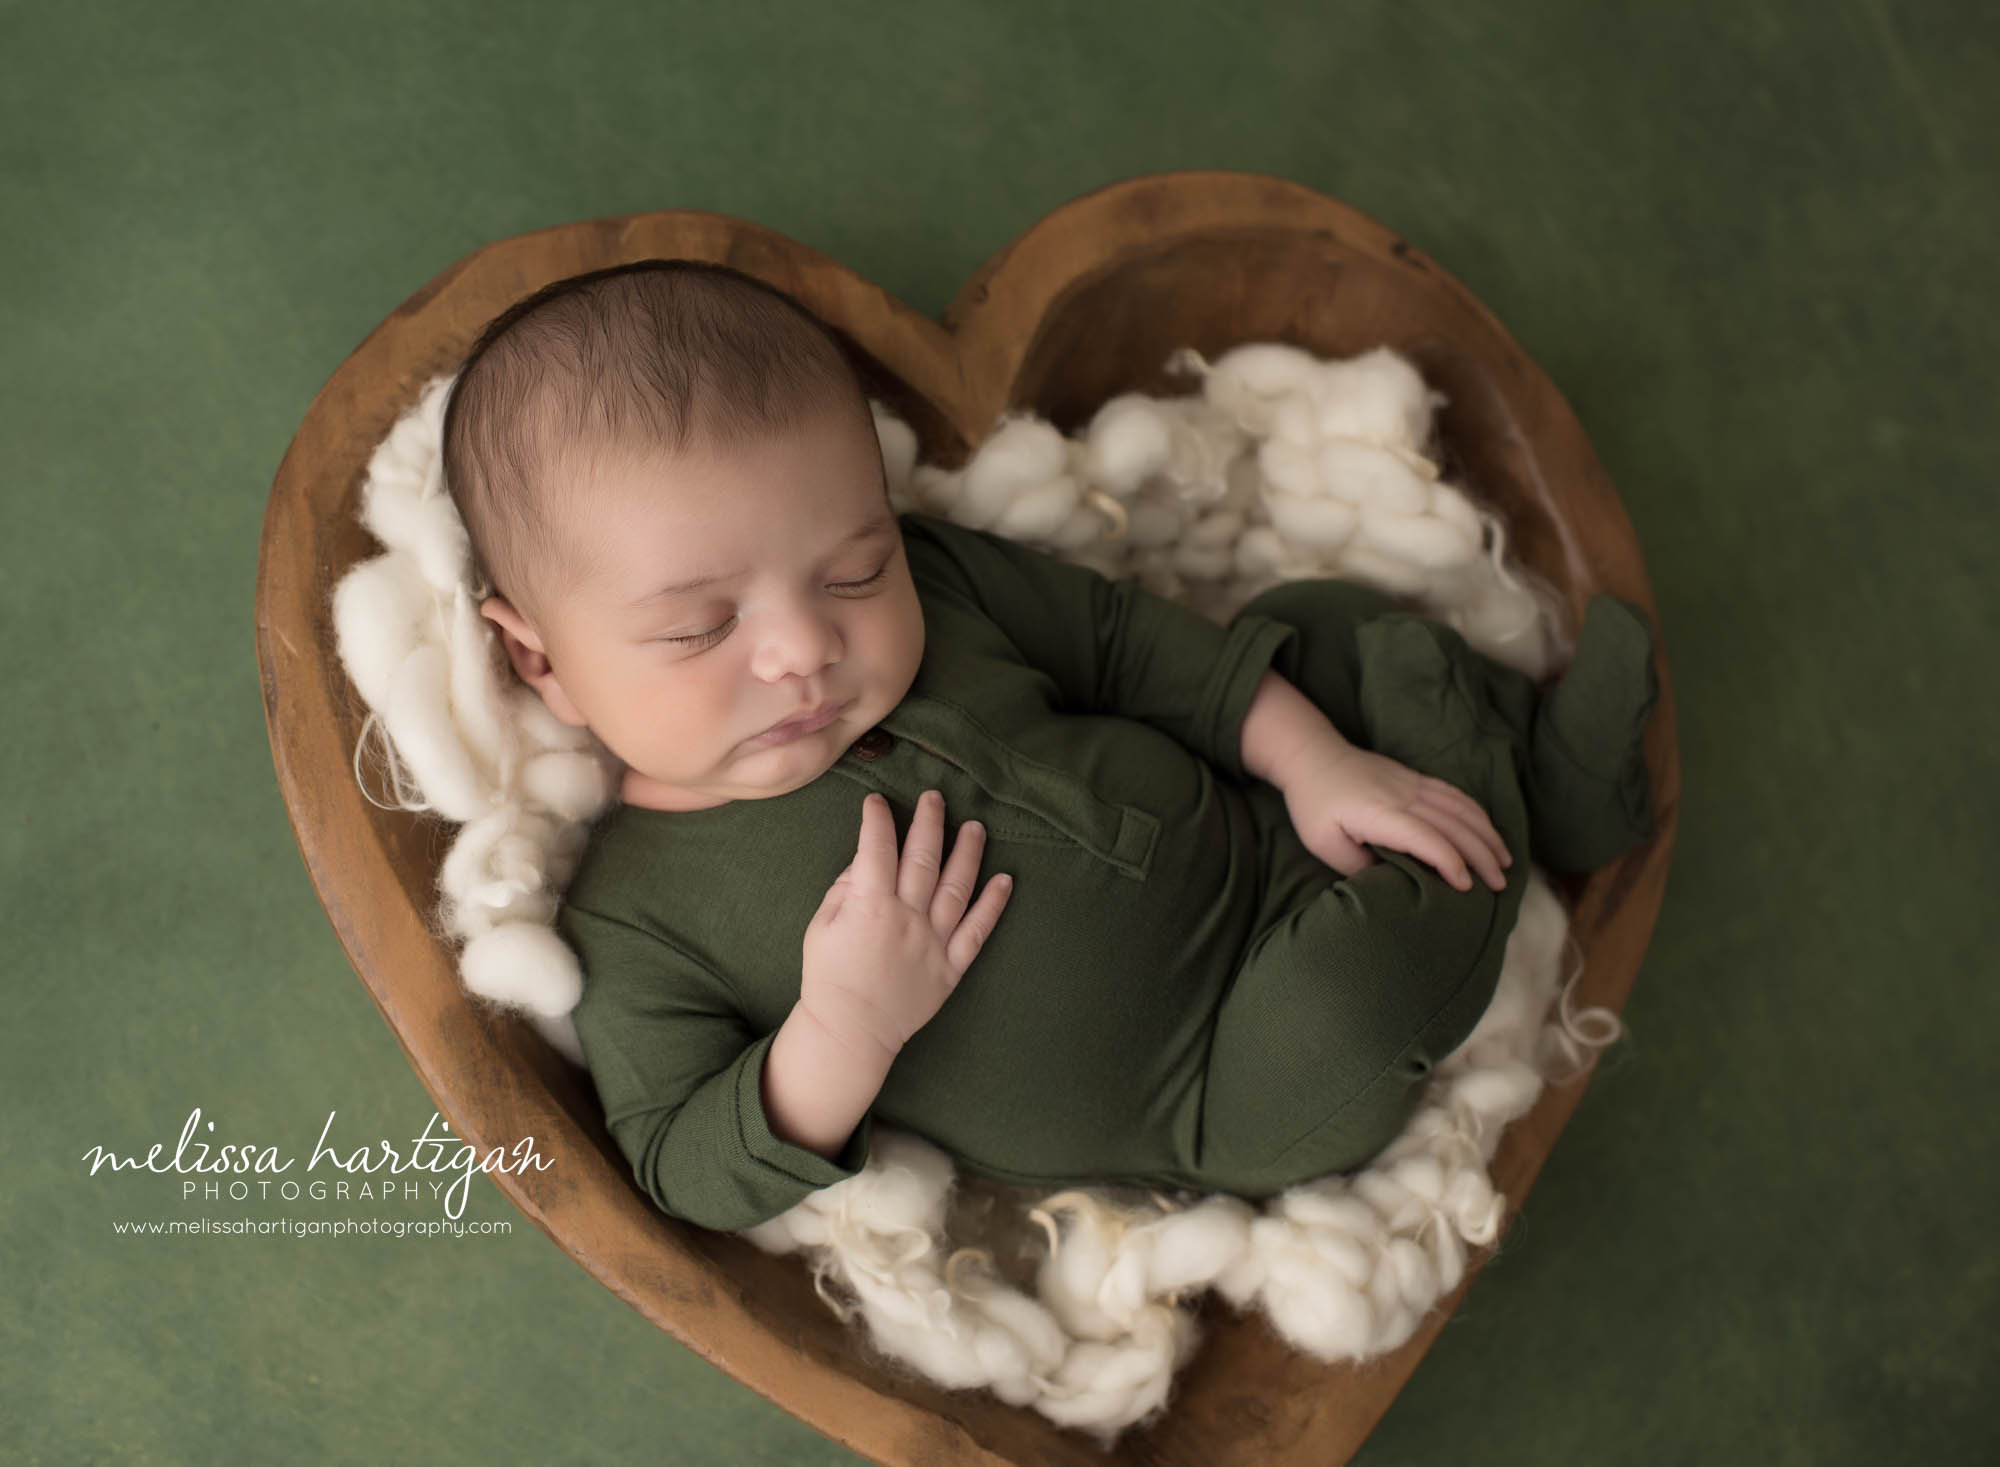 newborn baby boy wearing green footed romper posed in wooden heart bowl prop with cream fluffy layer